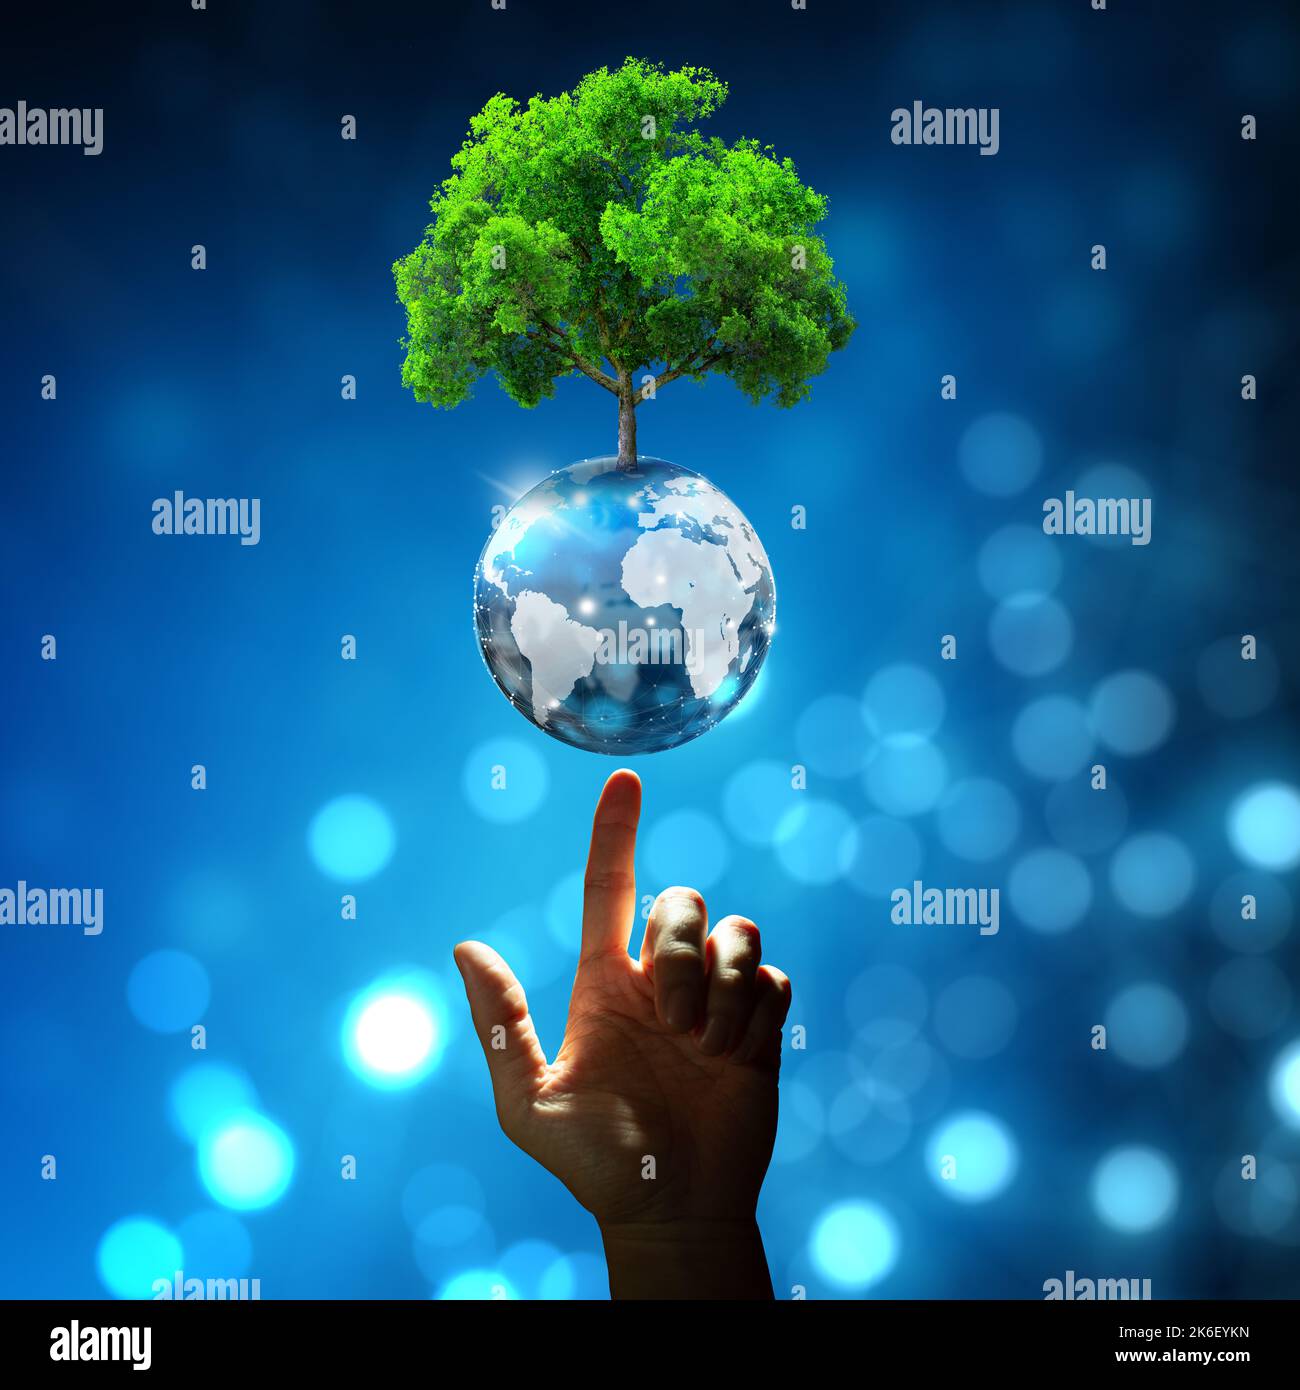 Hand pointing growing tree on crystal ball with technological convergence blue background. Innovative technology, Nature technology interaction. Stock Photo